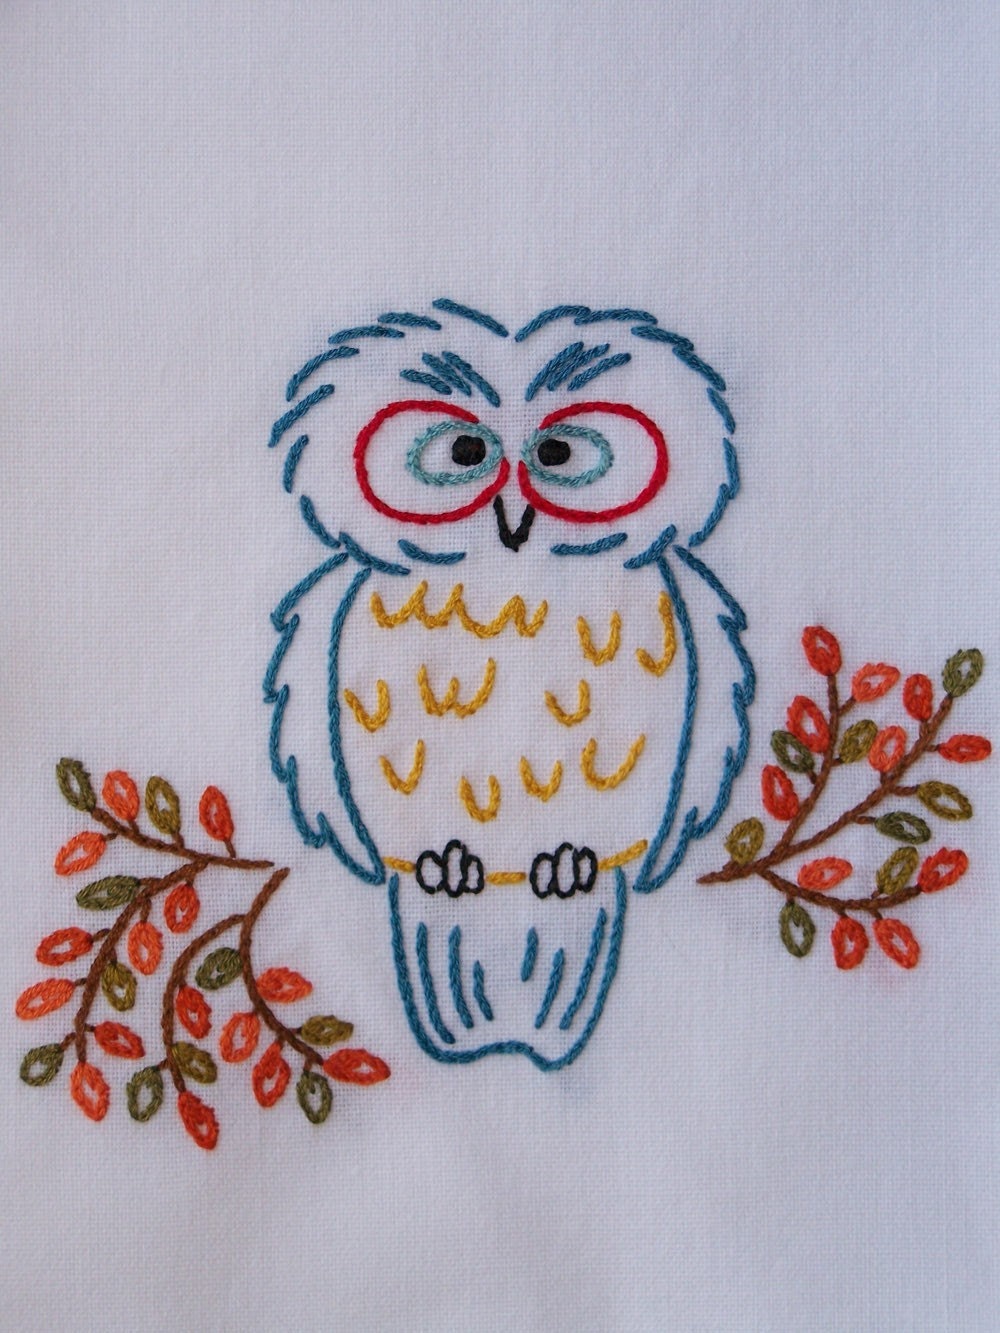 Download Quirky Retro Owl Hand-Embroidered Tea Towel/Dish Towel/Towel